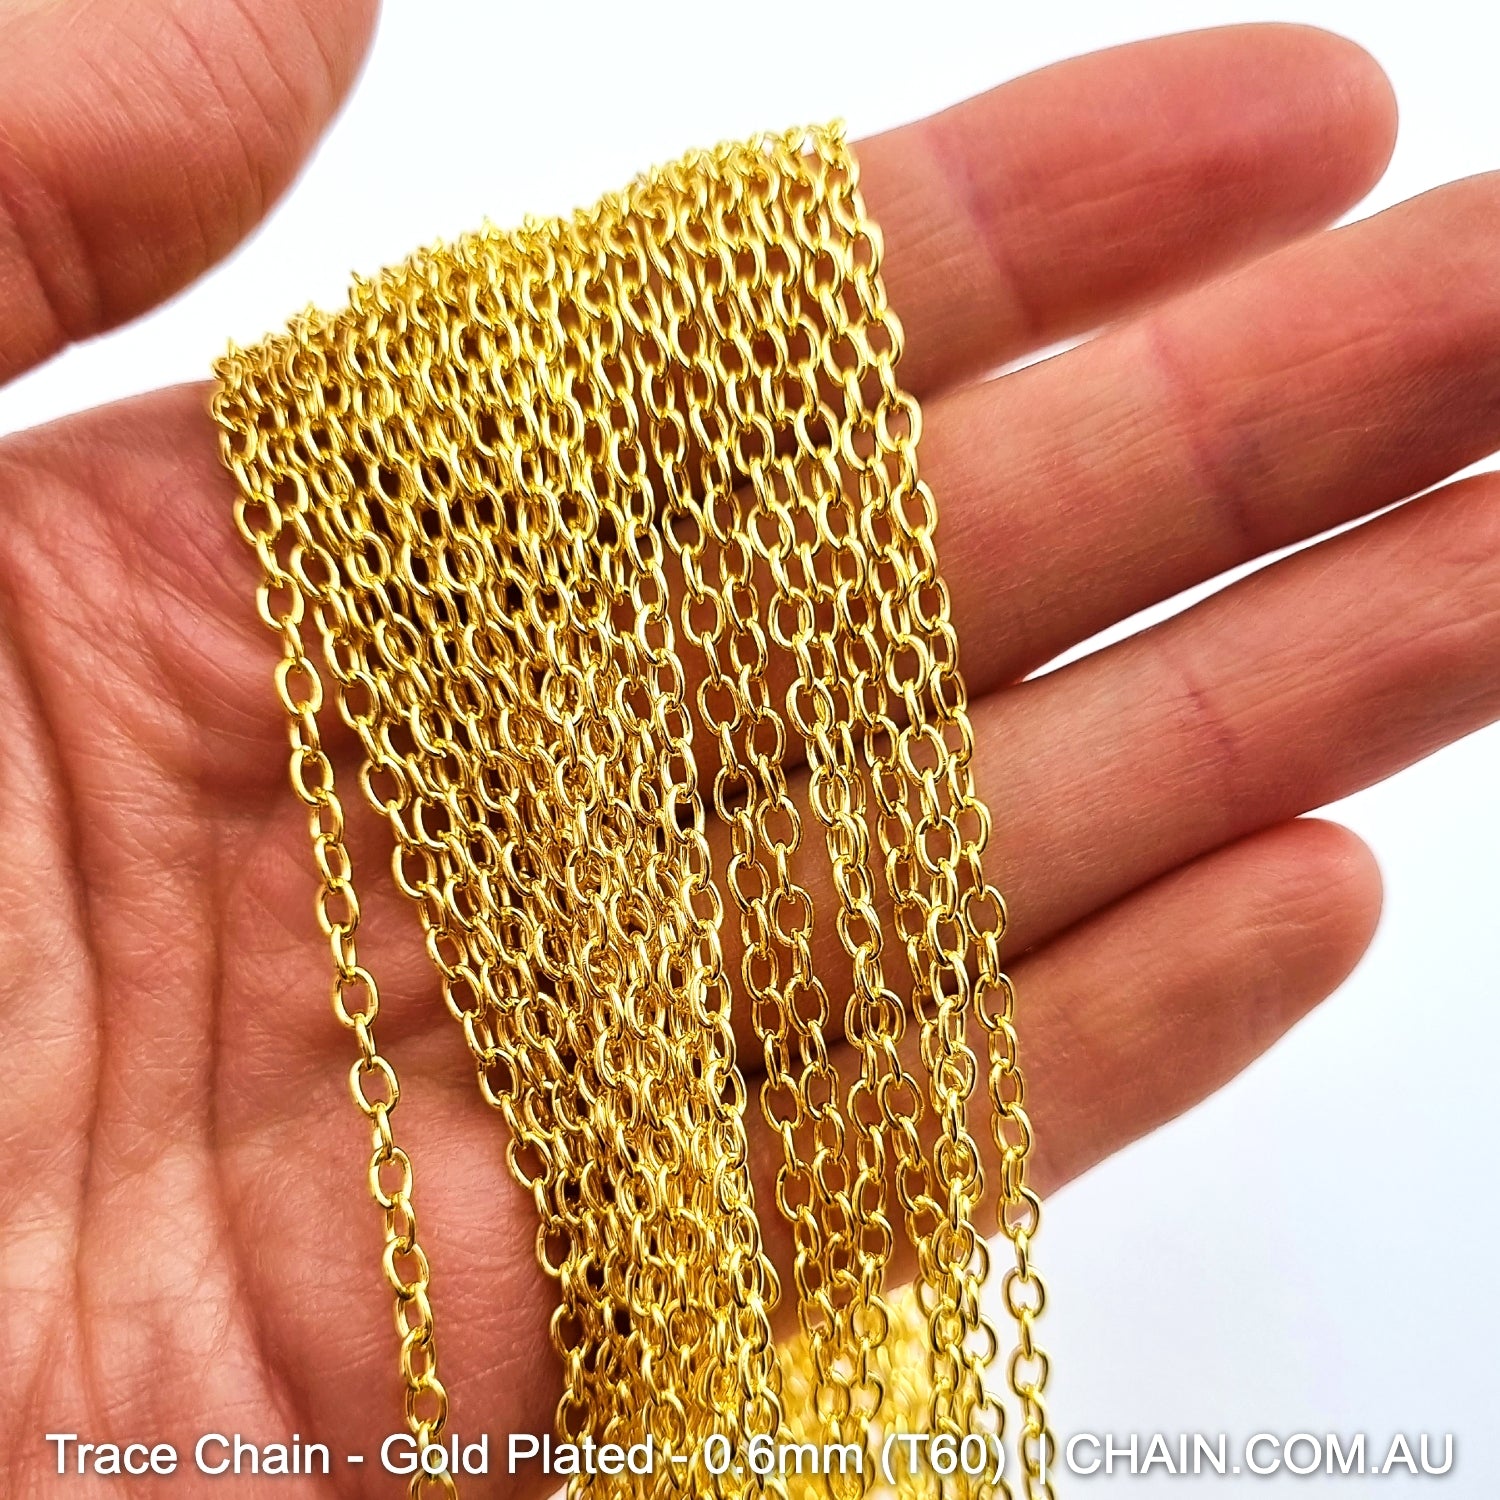 Gold Plated Trace Chain. Size: 0.6mm, T60. Jewellery Chain, Australia wide shipping. Shop chain.com.au